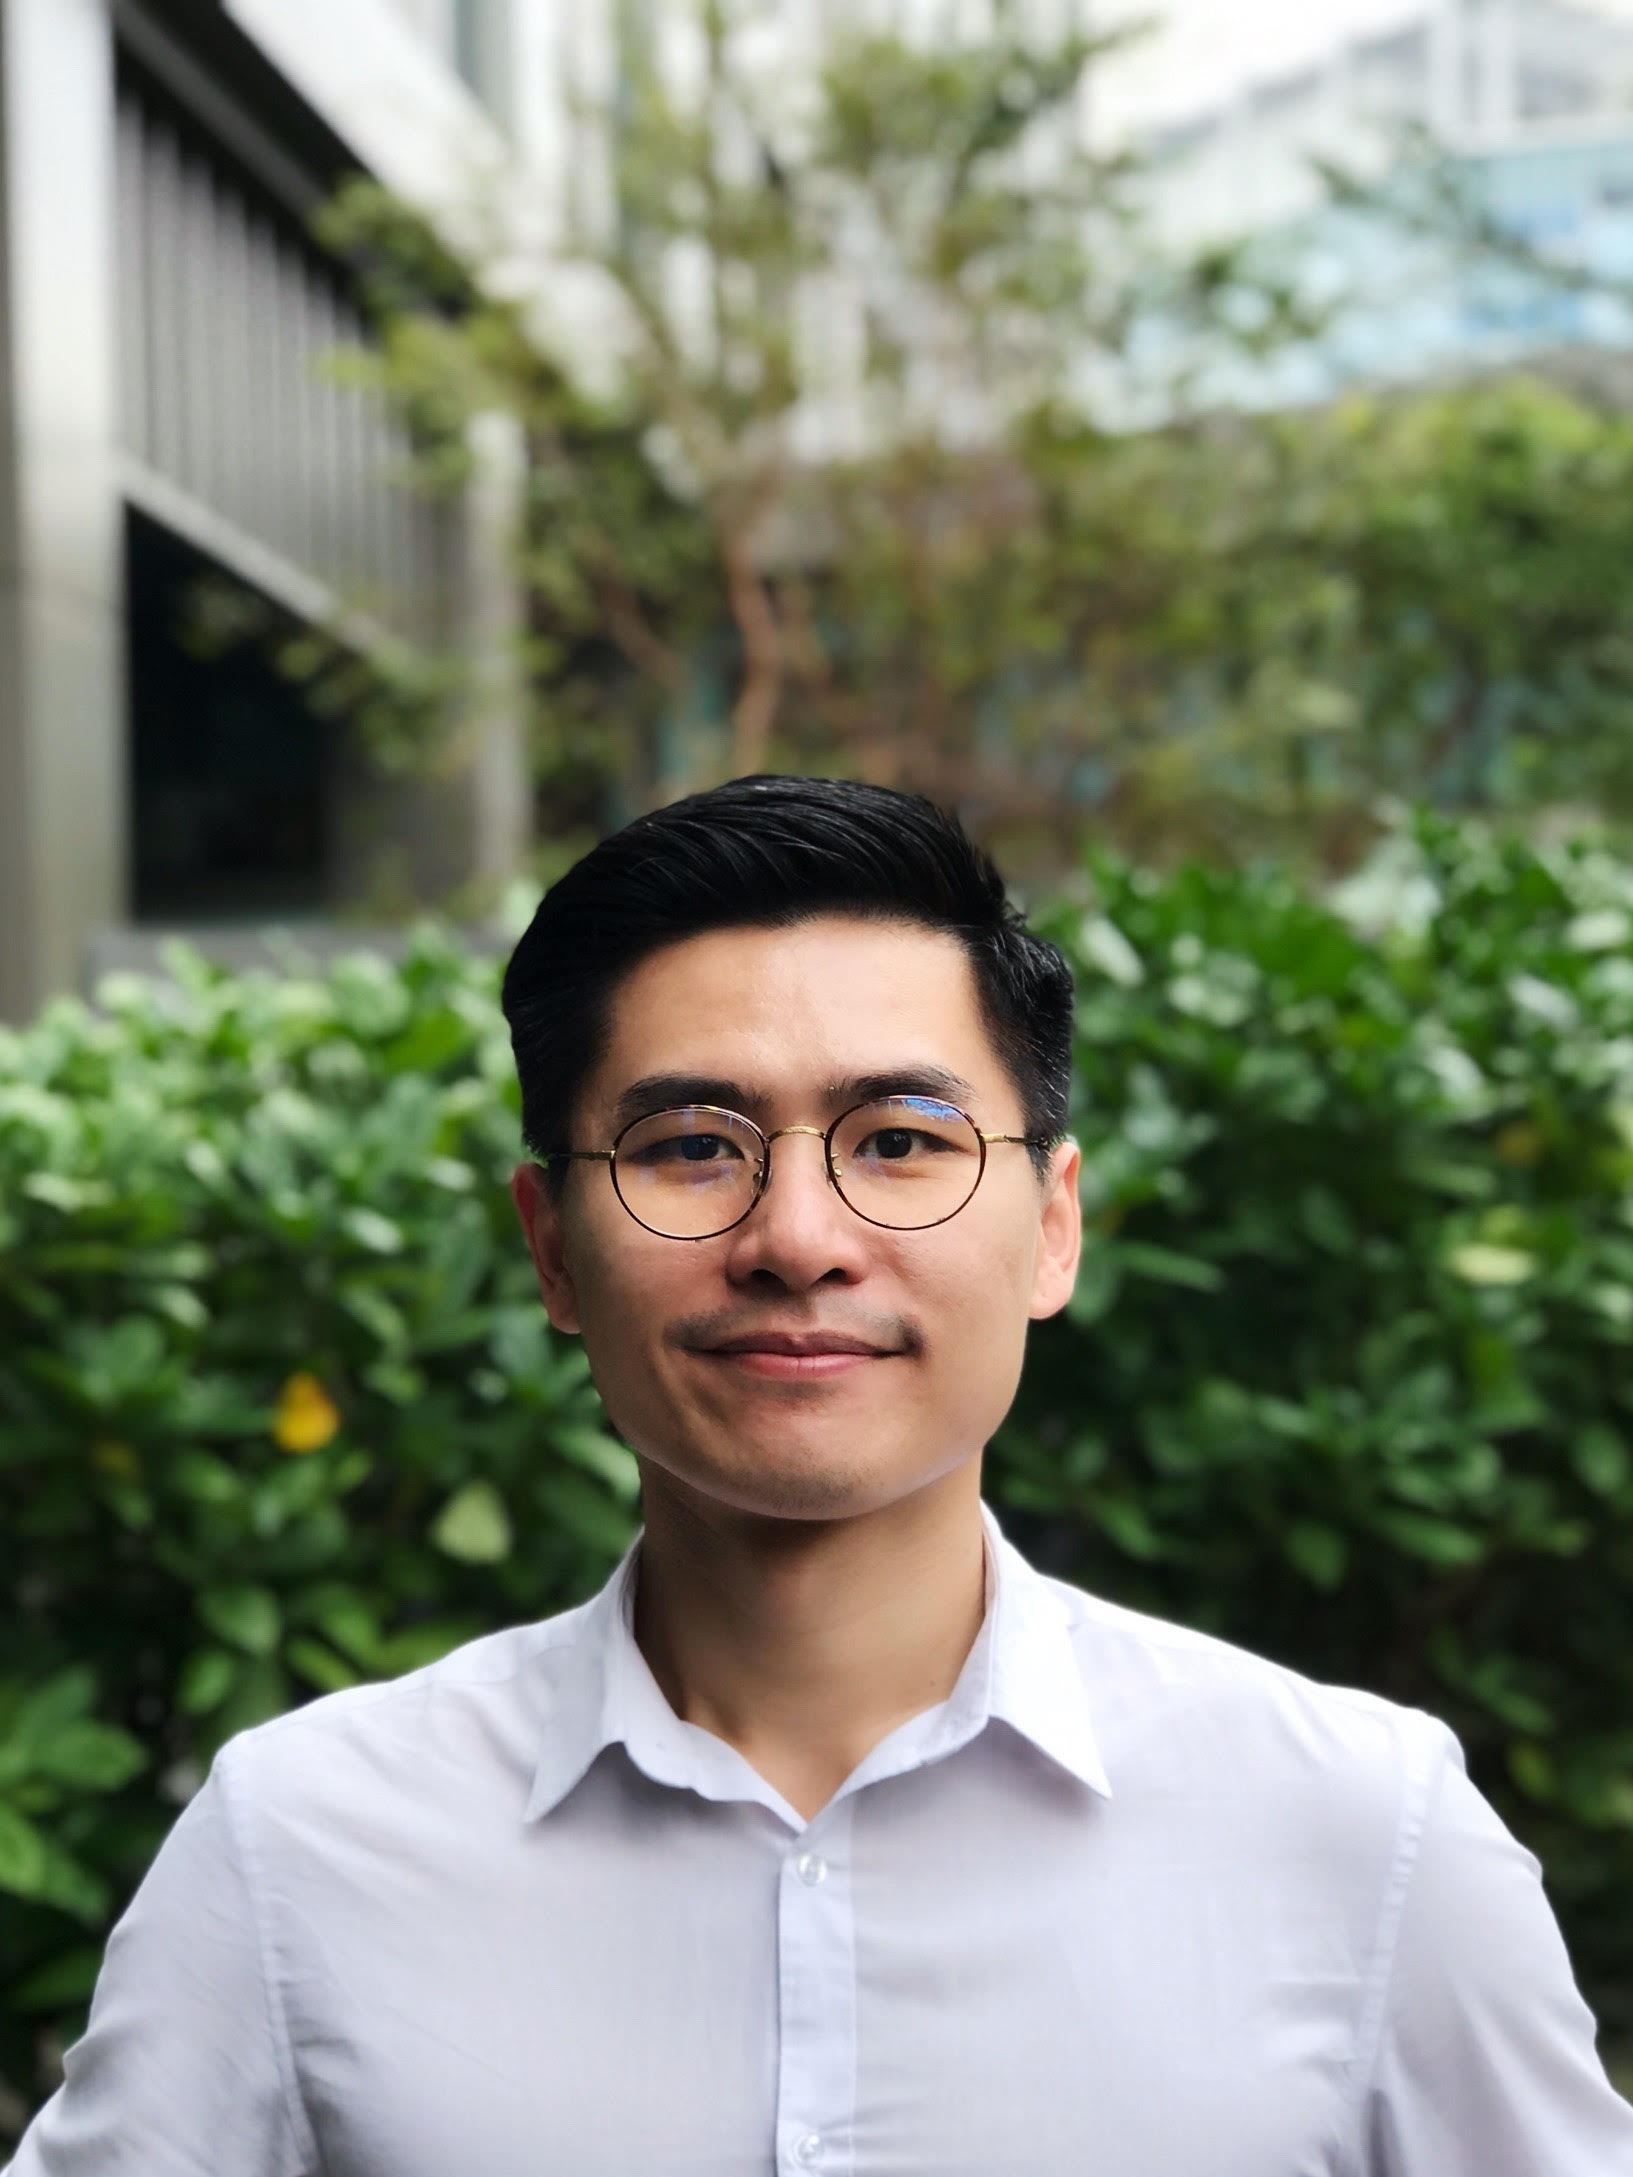 AI Vision in Industry 4.0: Q&A with Kyle Tan, CEO and co-founder of Airsquire